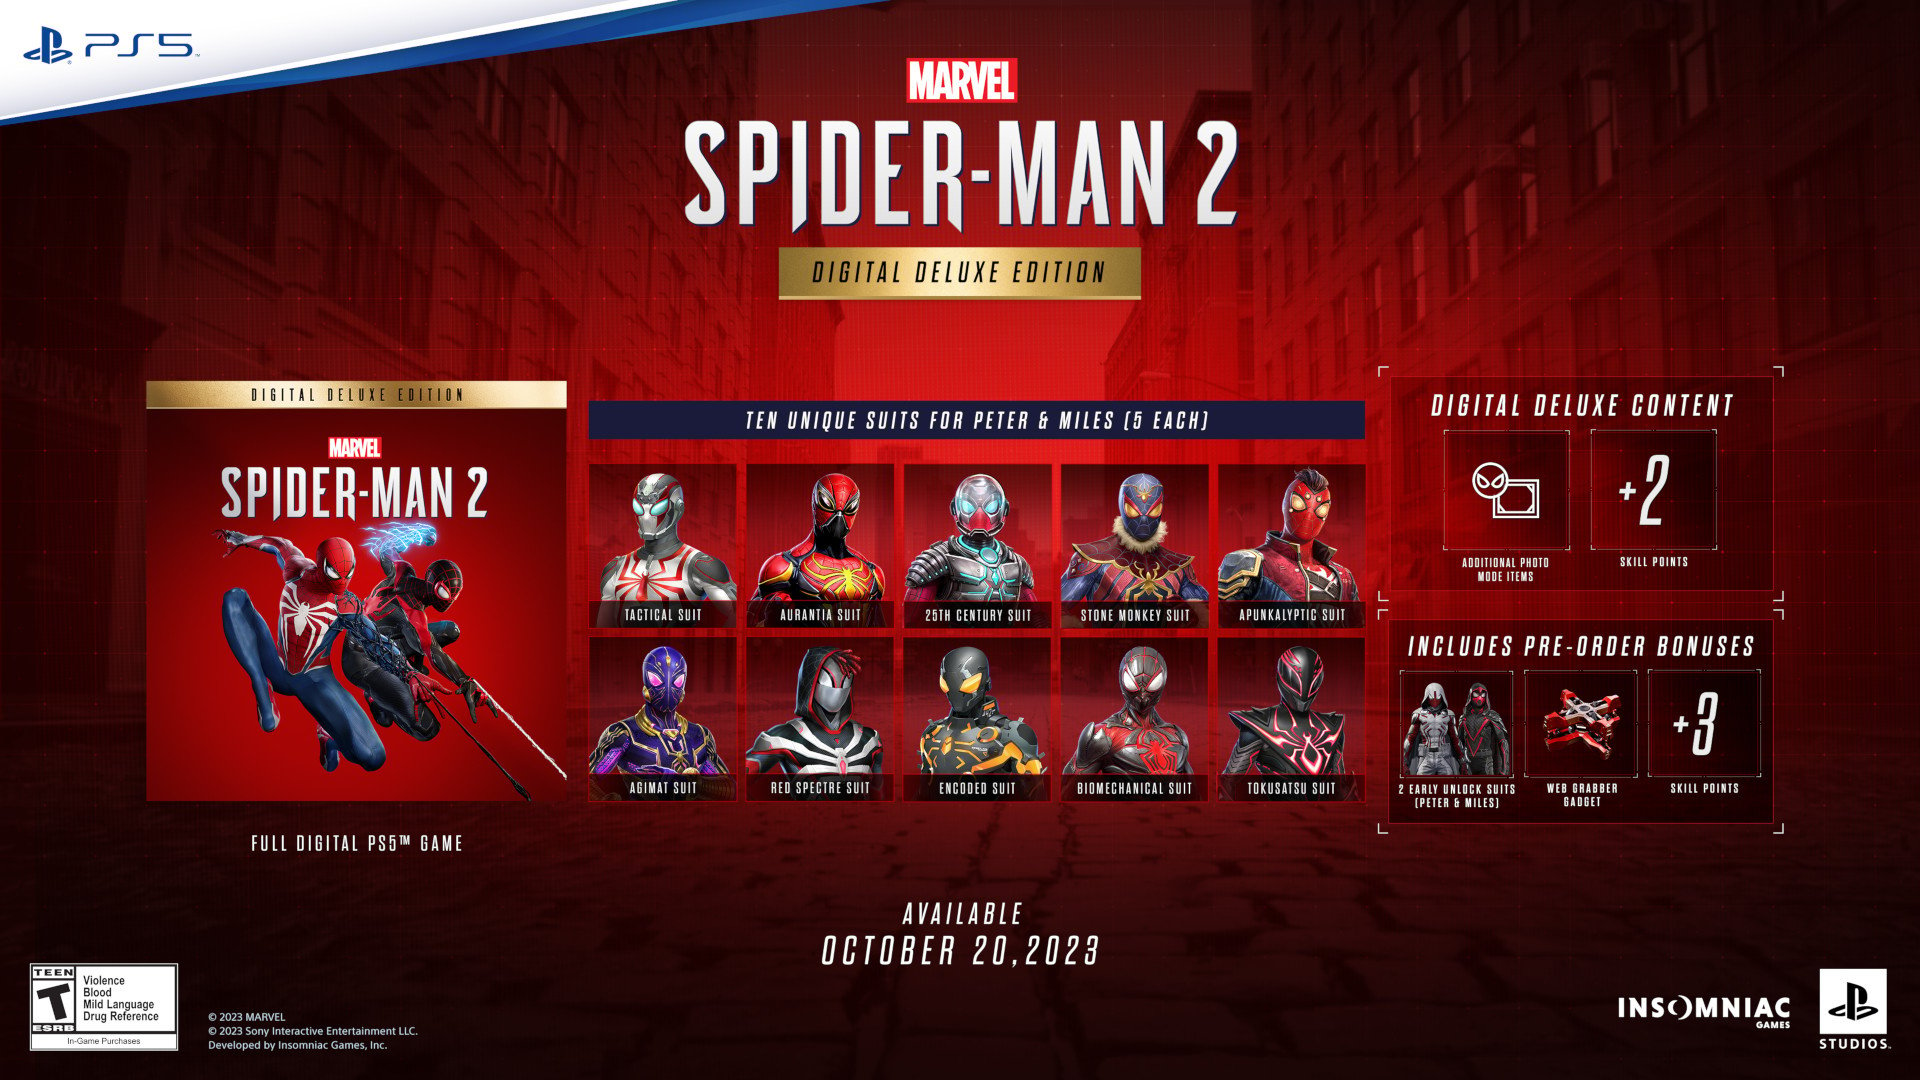 Image] To all those physical game collectors out there, Spider-Man GOTY  edition doesn't have the dlc on disc, instead it comes as a voucher : r/PS4